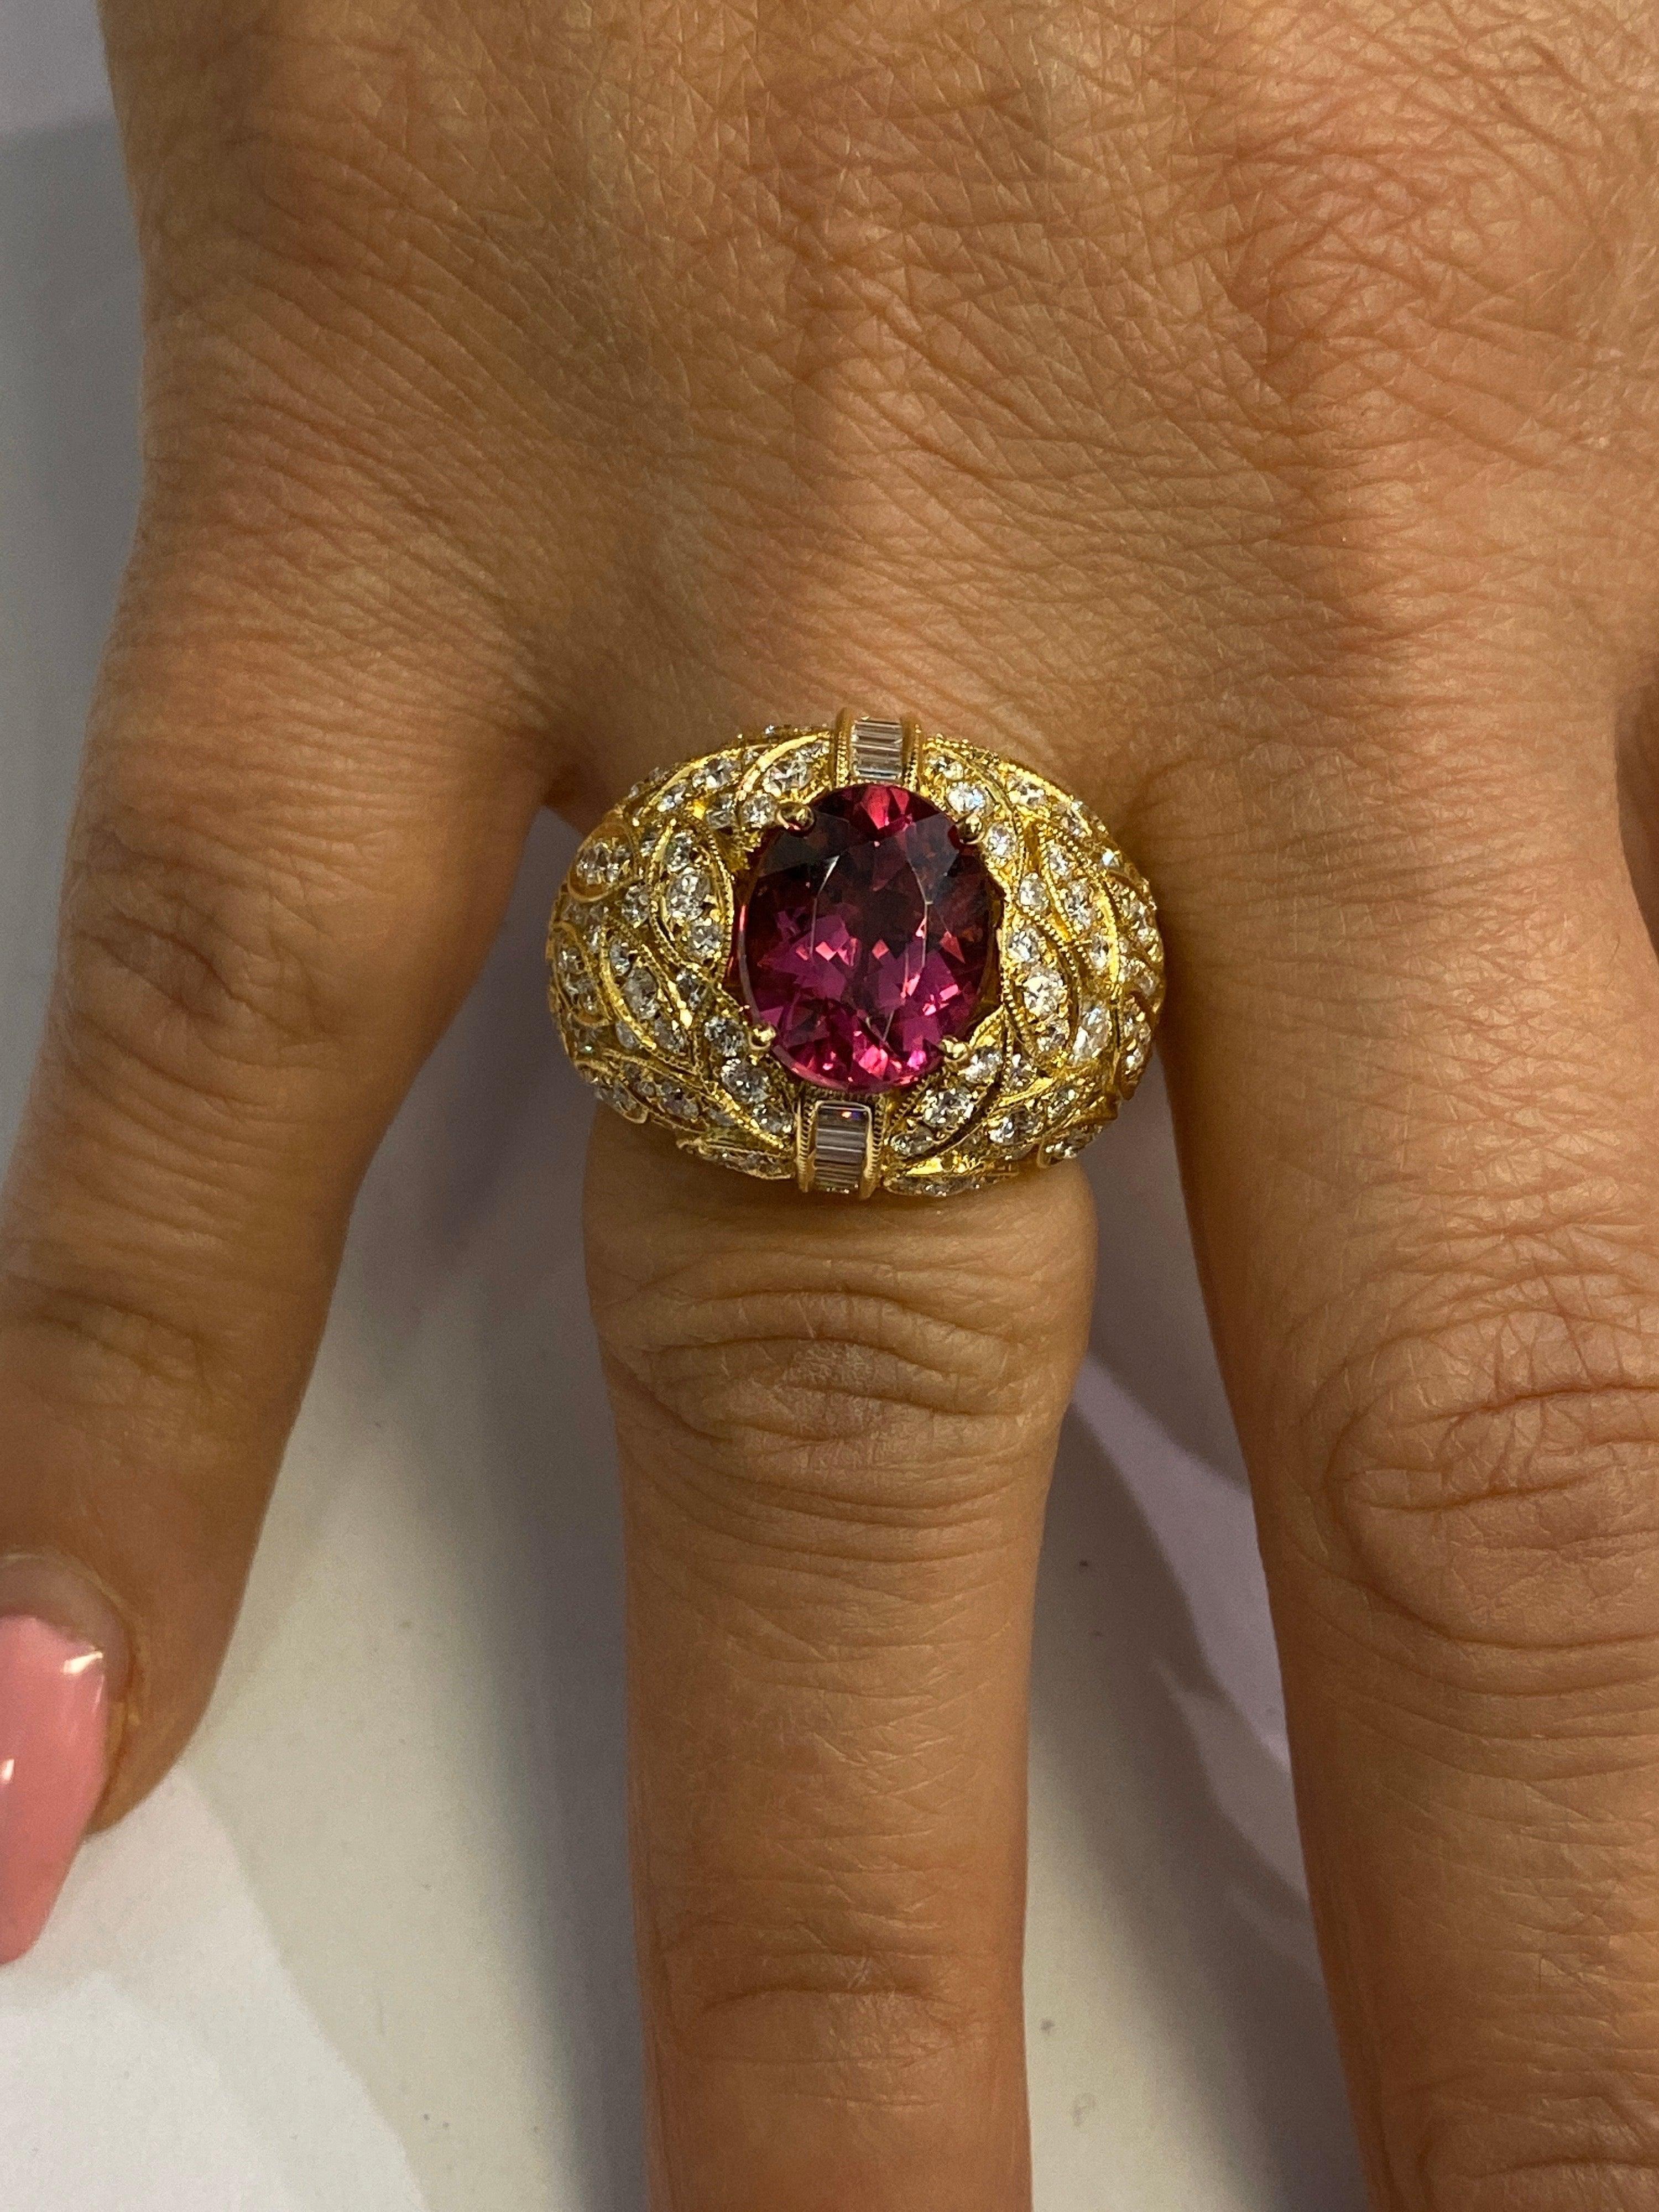 Women's Yellow Gold and Diamond Ring with Rubellite Tourmaline Center